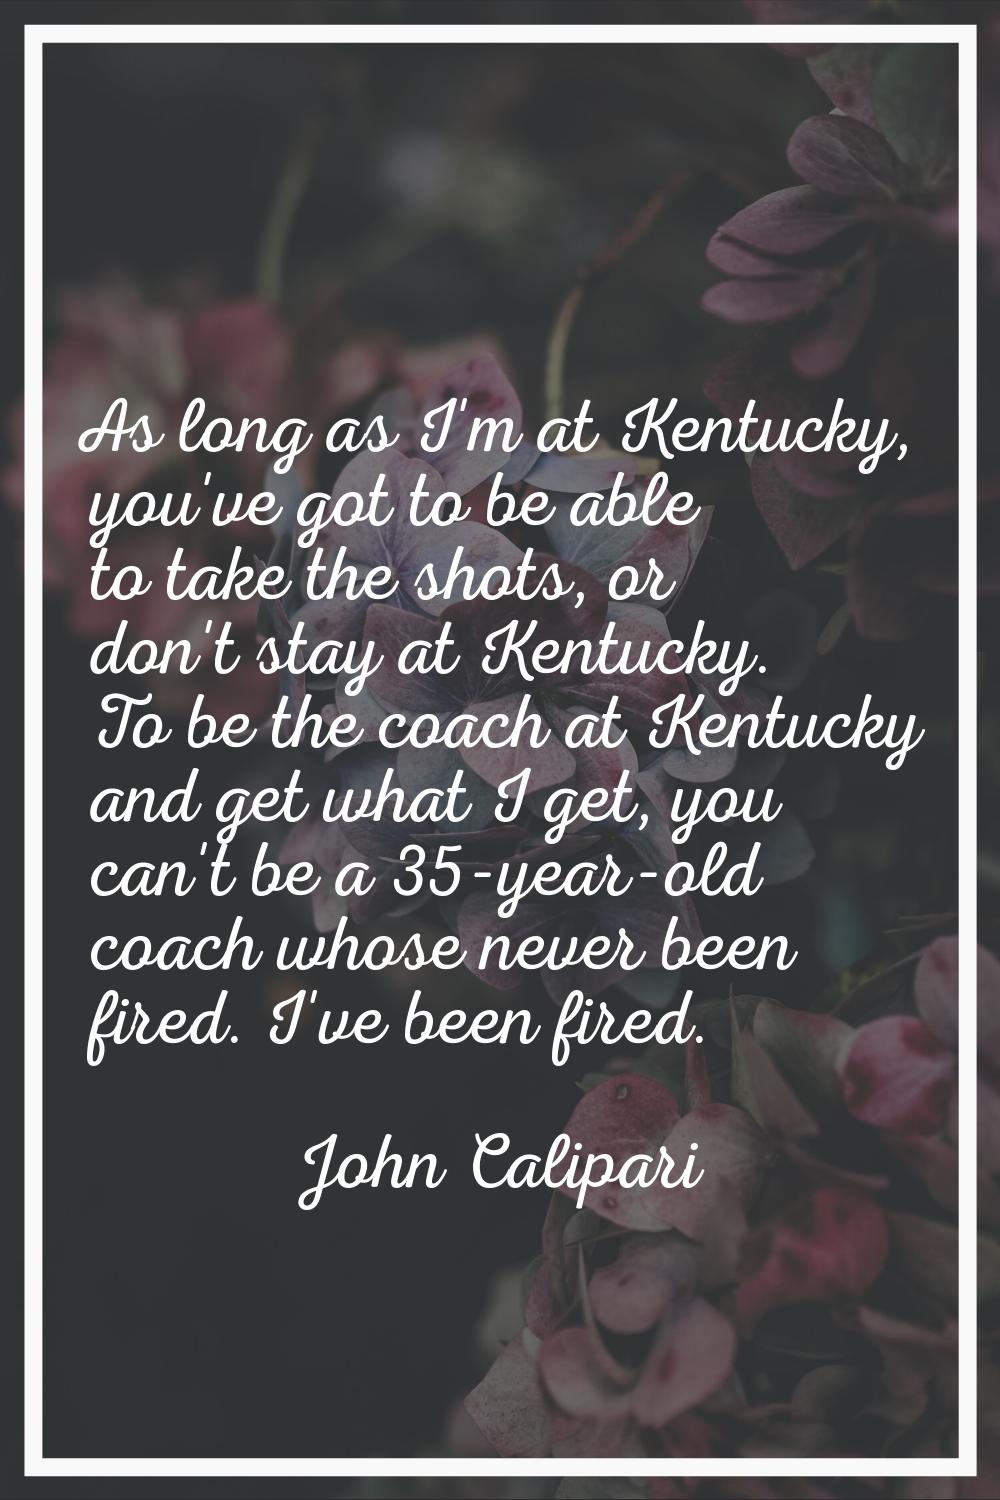 As long as I'm at Kentucky, you've got to be able to take the shots, or don't stay at Kentucky. To 